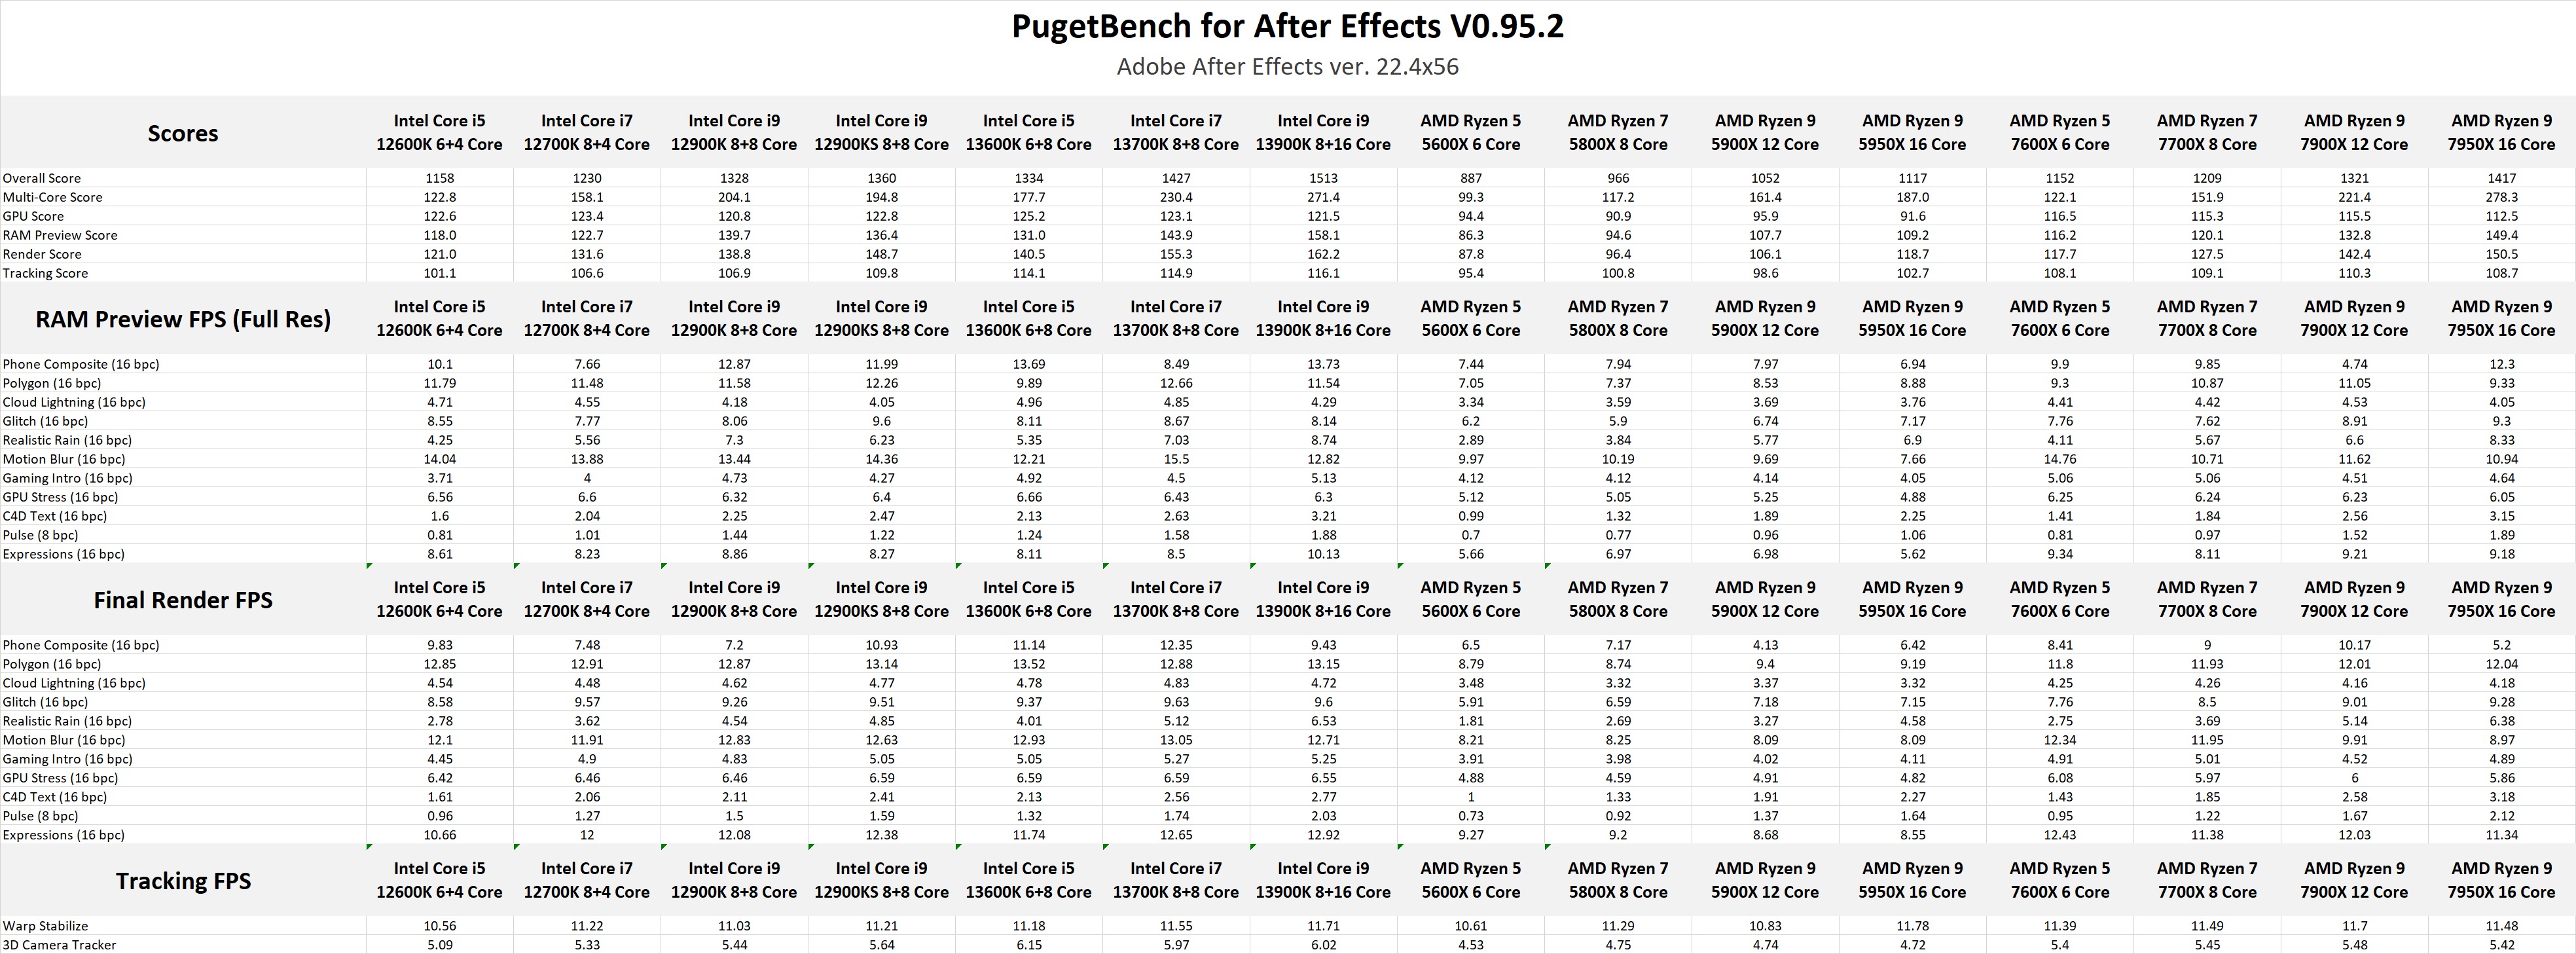 PugetBench for After Effects AMD Ryzen 7000 raw results